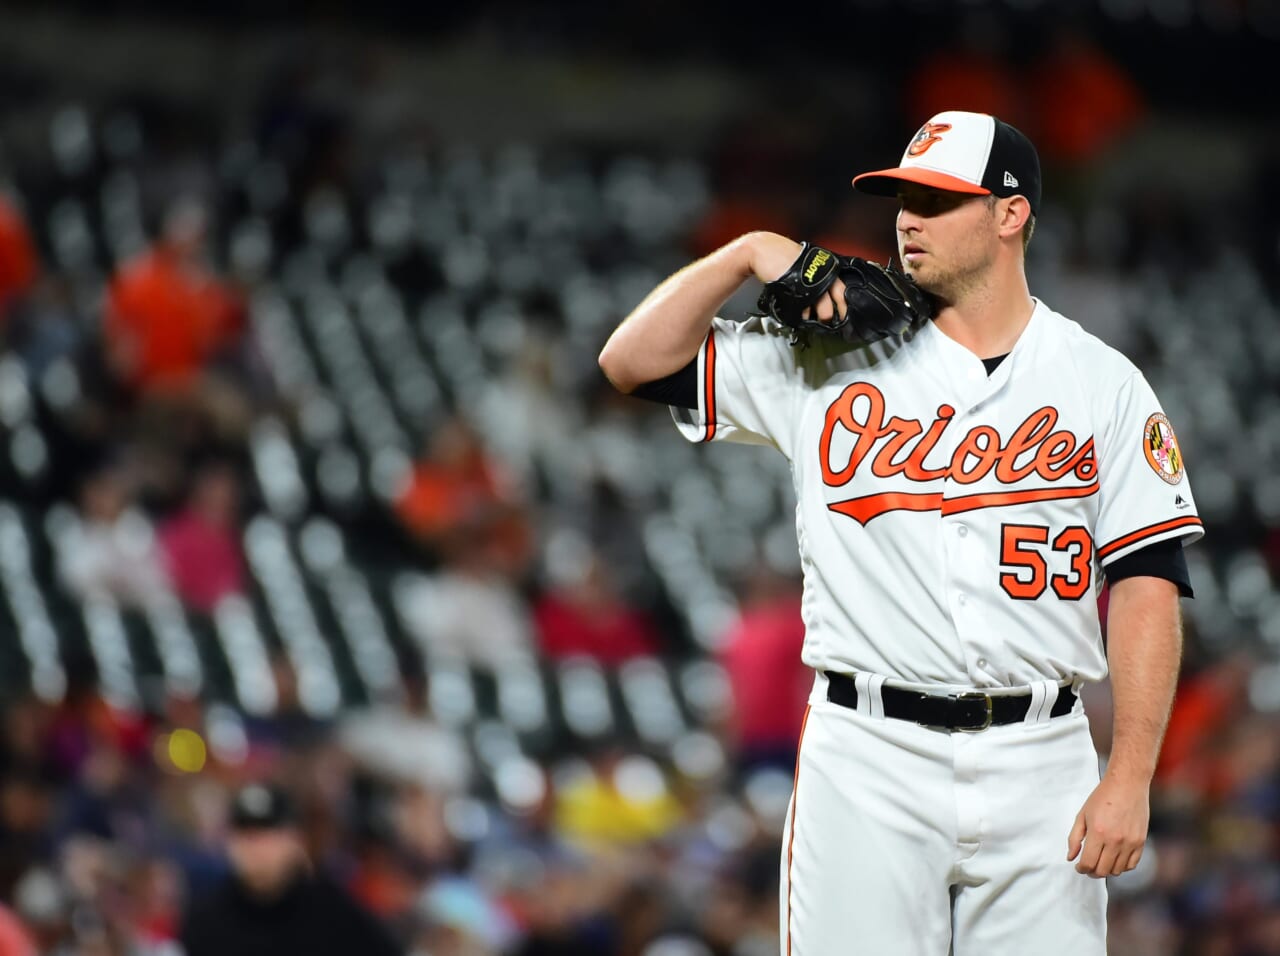 New York Yankees Acquire Zach Britton From The Orioles For 3 Prospects